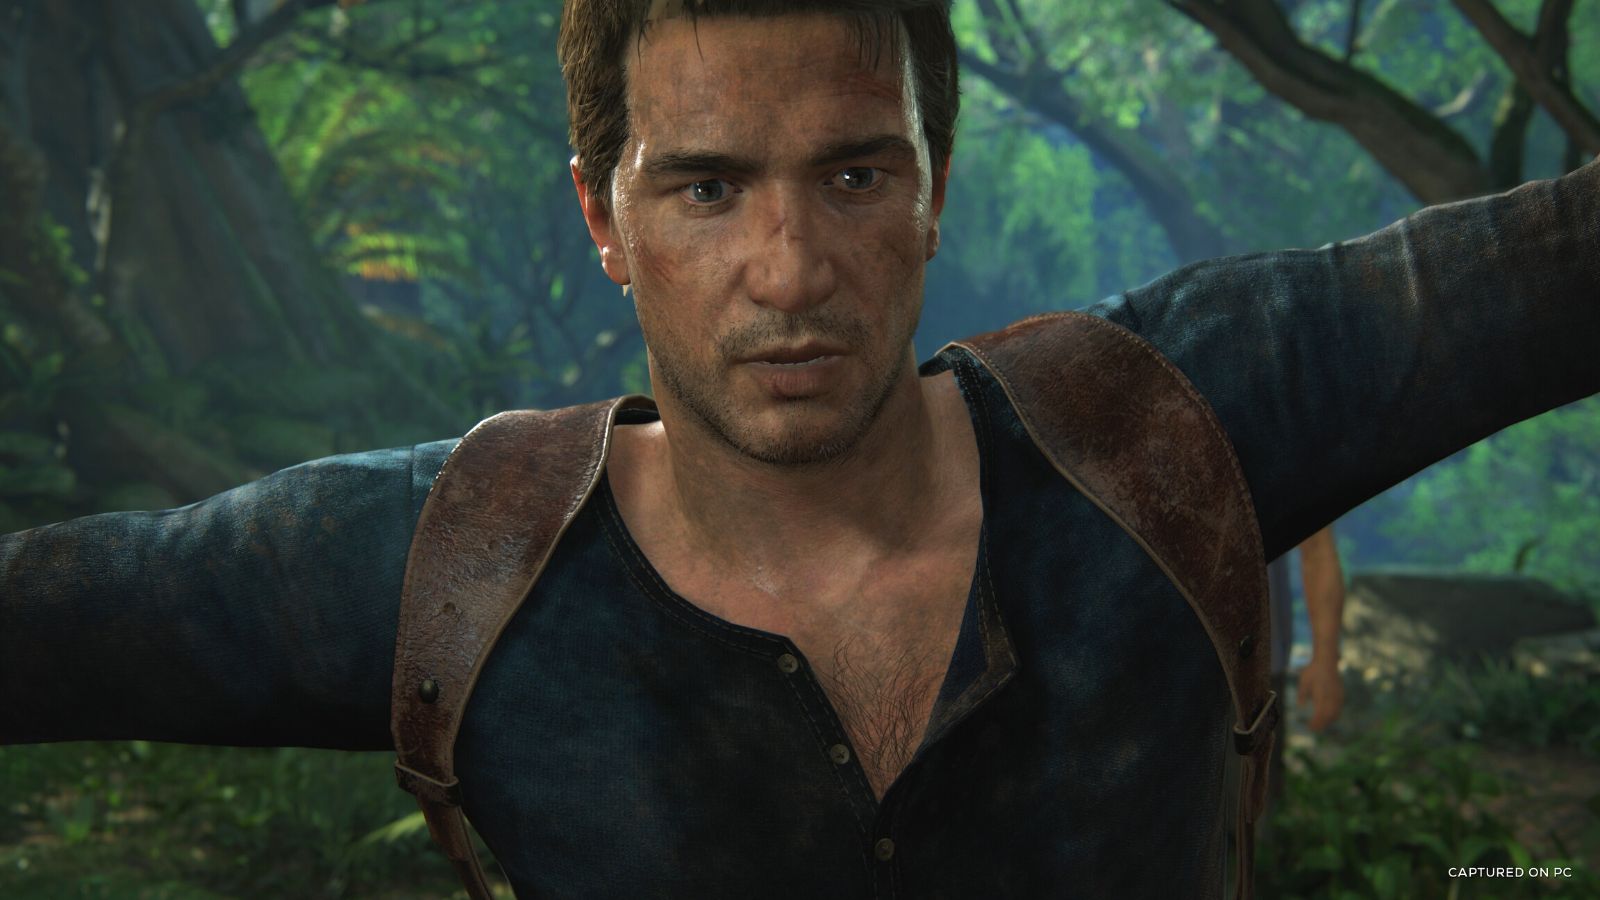 Uncharted fans think Sony's latest PS5 ad features new game tease - Dexerto